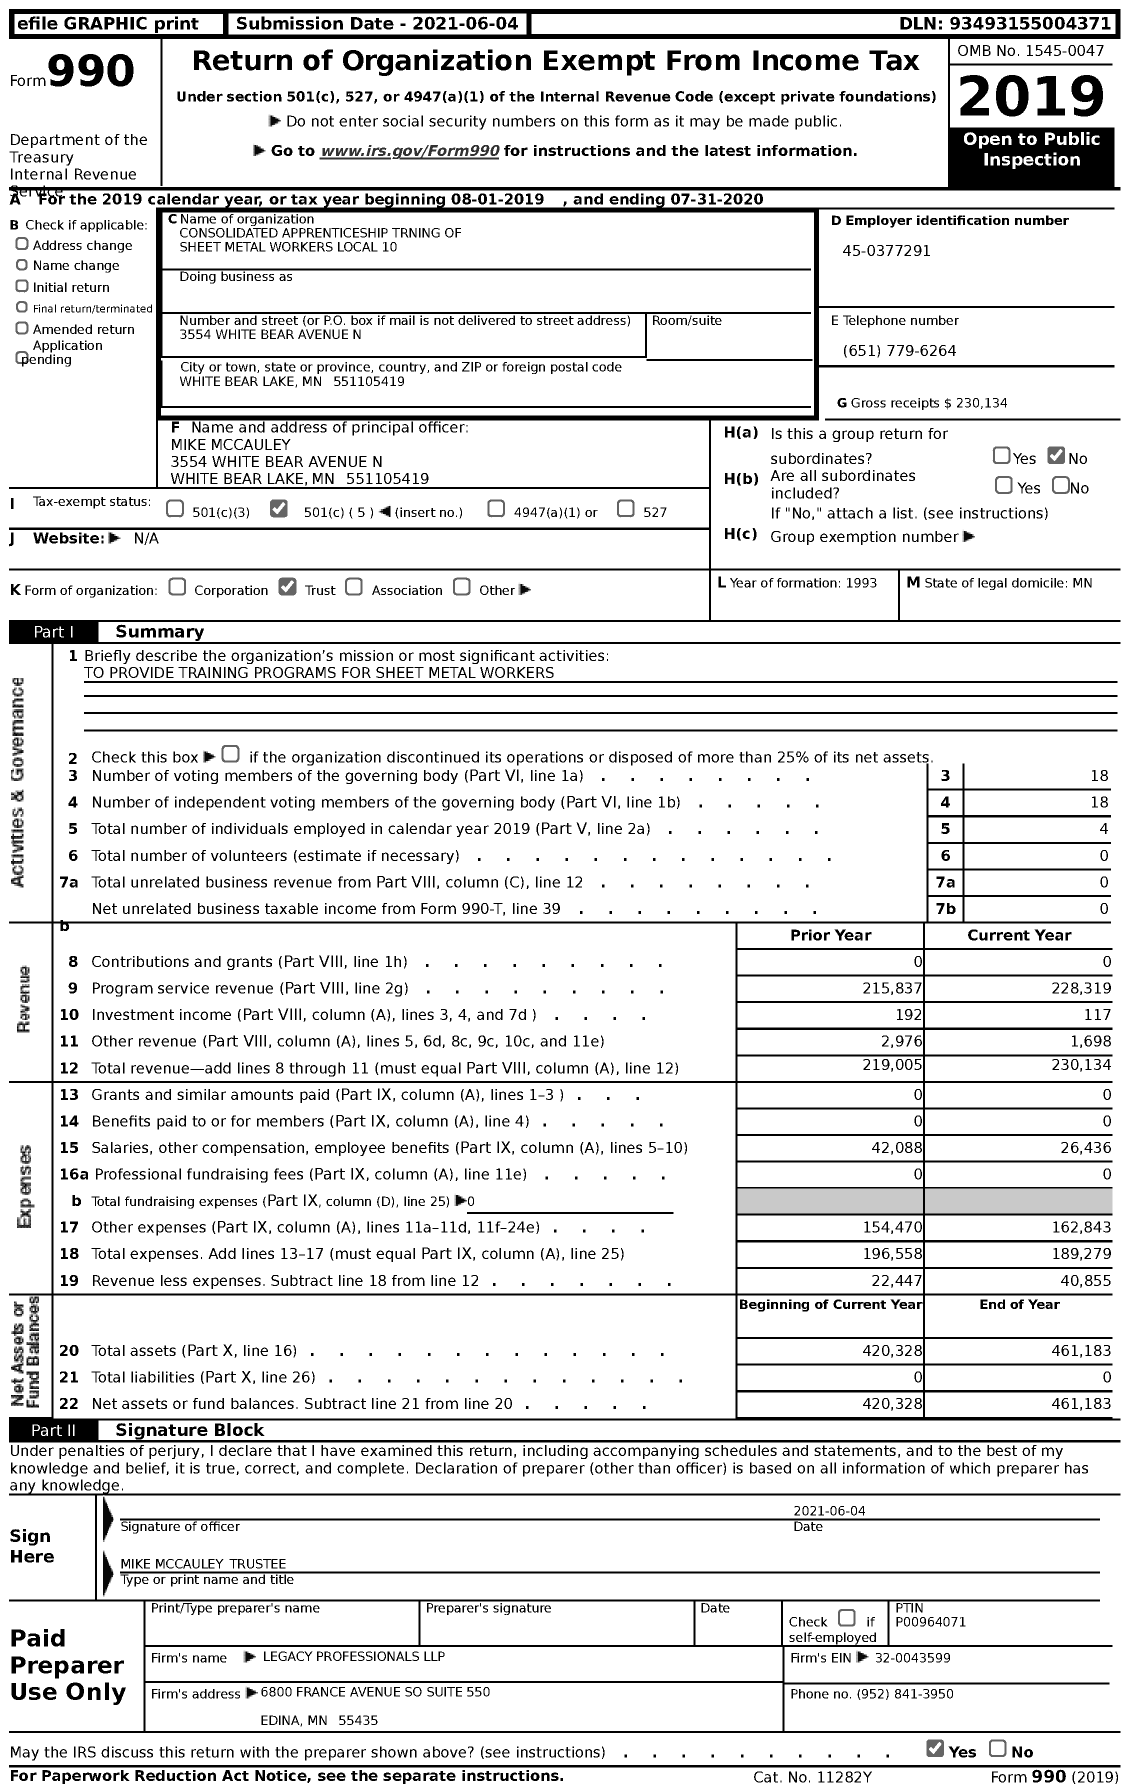 Image of first page of 2019 Form 990 for Consolidated Apprenticeship Trning of Sheet Metal Workers Local 10